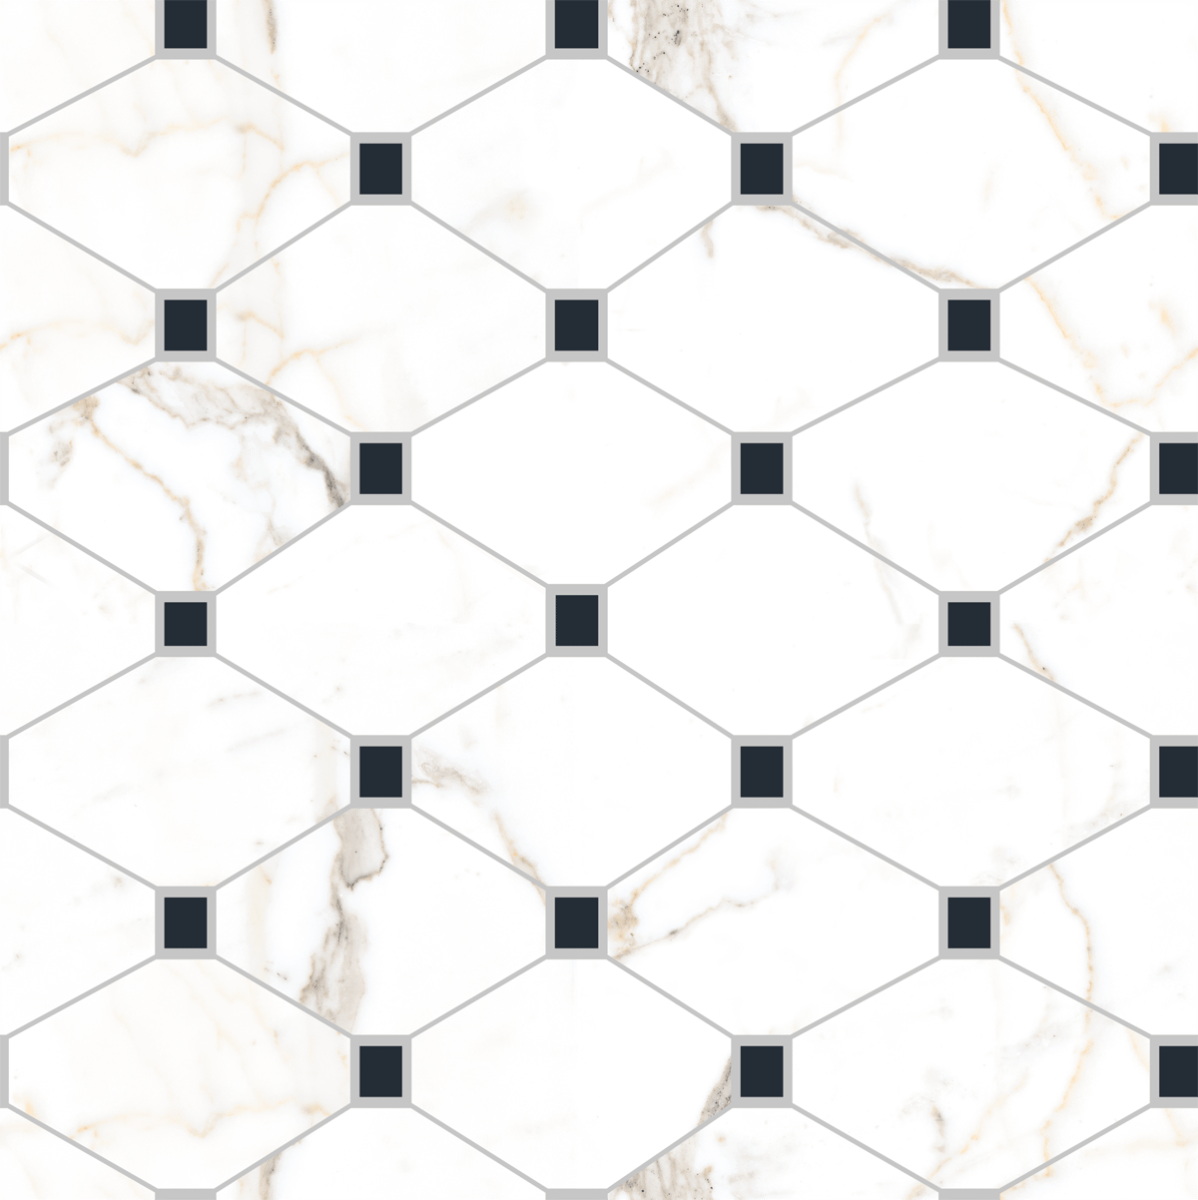 Accent Tiles for Living Room Tiles, Kitchen Tiles, Bedroom Tiles, Accent Tiles, Office Tiles, Bar Tiles, Restaurant Tiles, Hospital Tiles, Bar/Restaurant, Commercial/Office